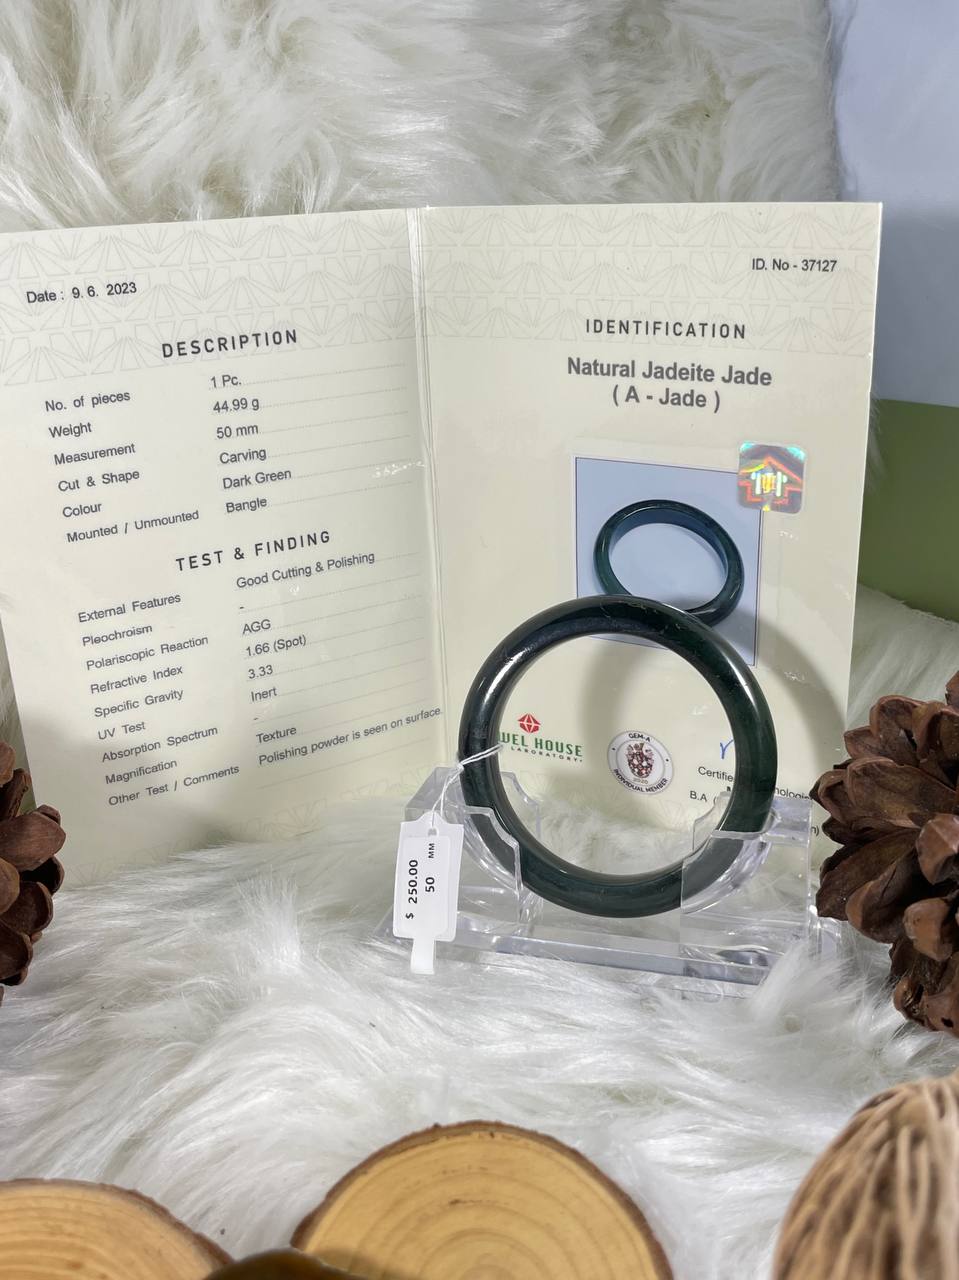 Grade A Natural Jade Bangle with certificate #37127